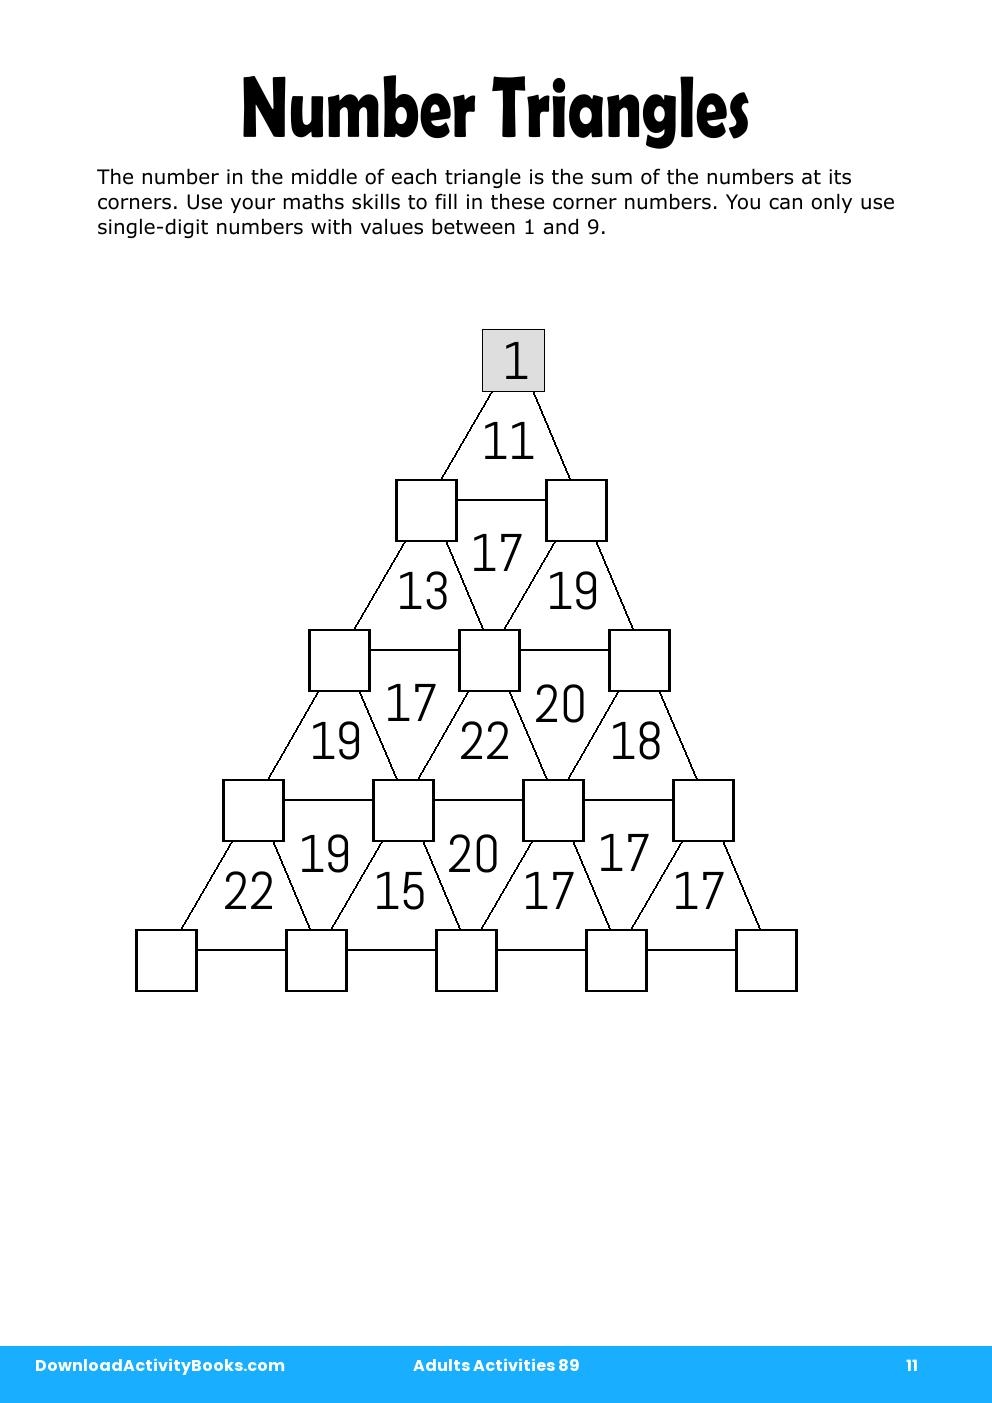 Number Triangles in Adults Activities 89